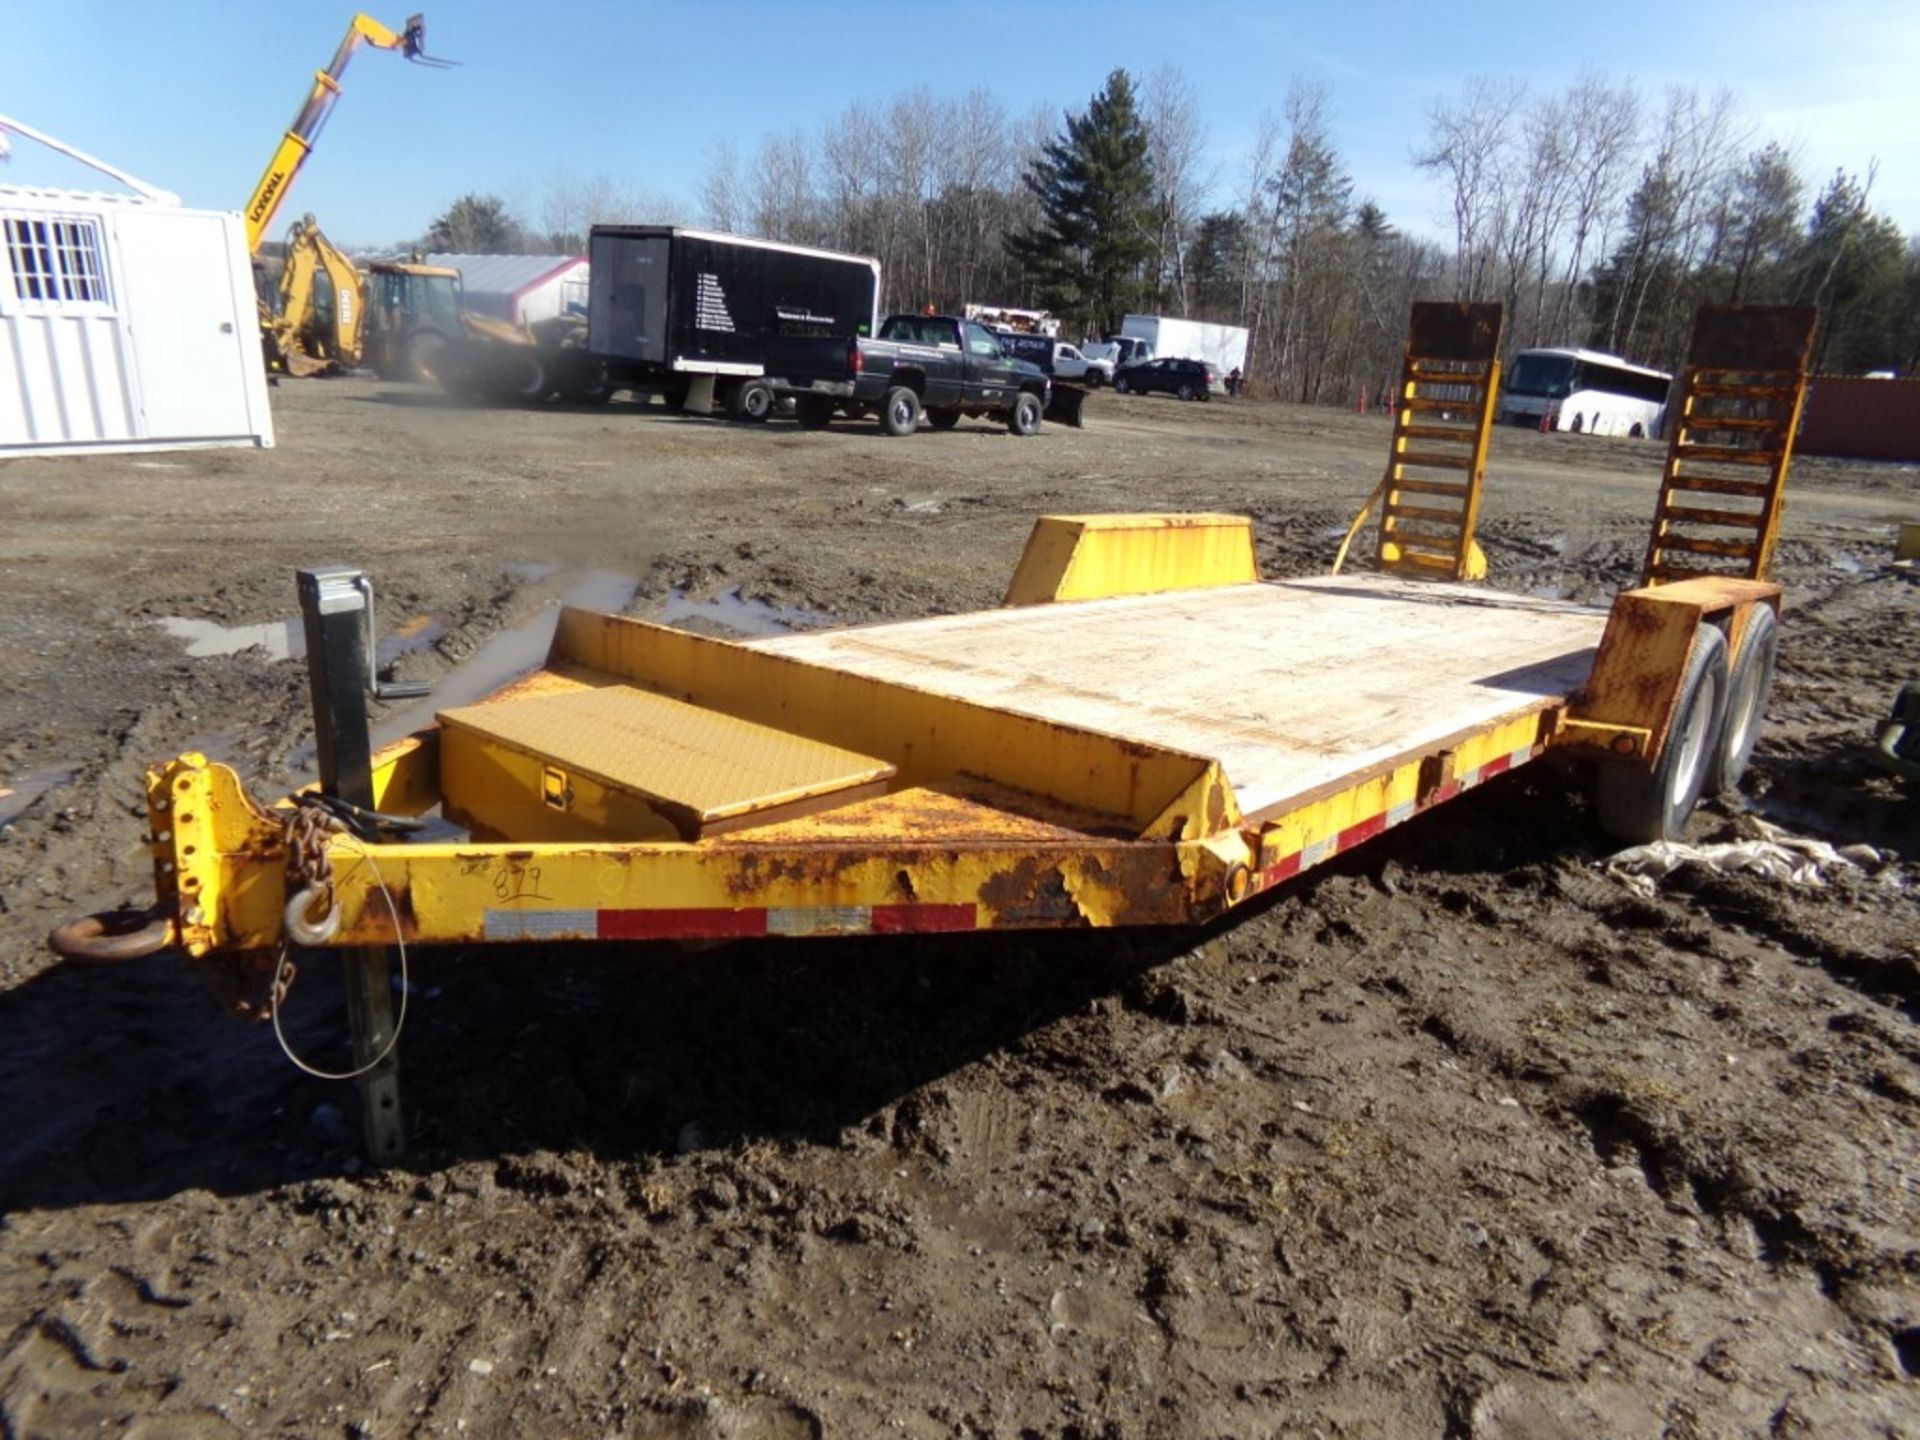 2015 BWise Yellow Tandem Axle Equipment Trailer, 18' X 80'' Flip Down Ramps, Pintle Hitch, Newer